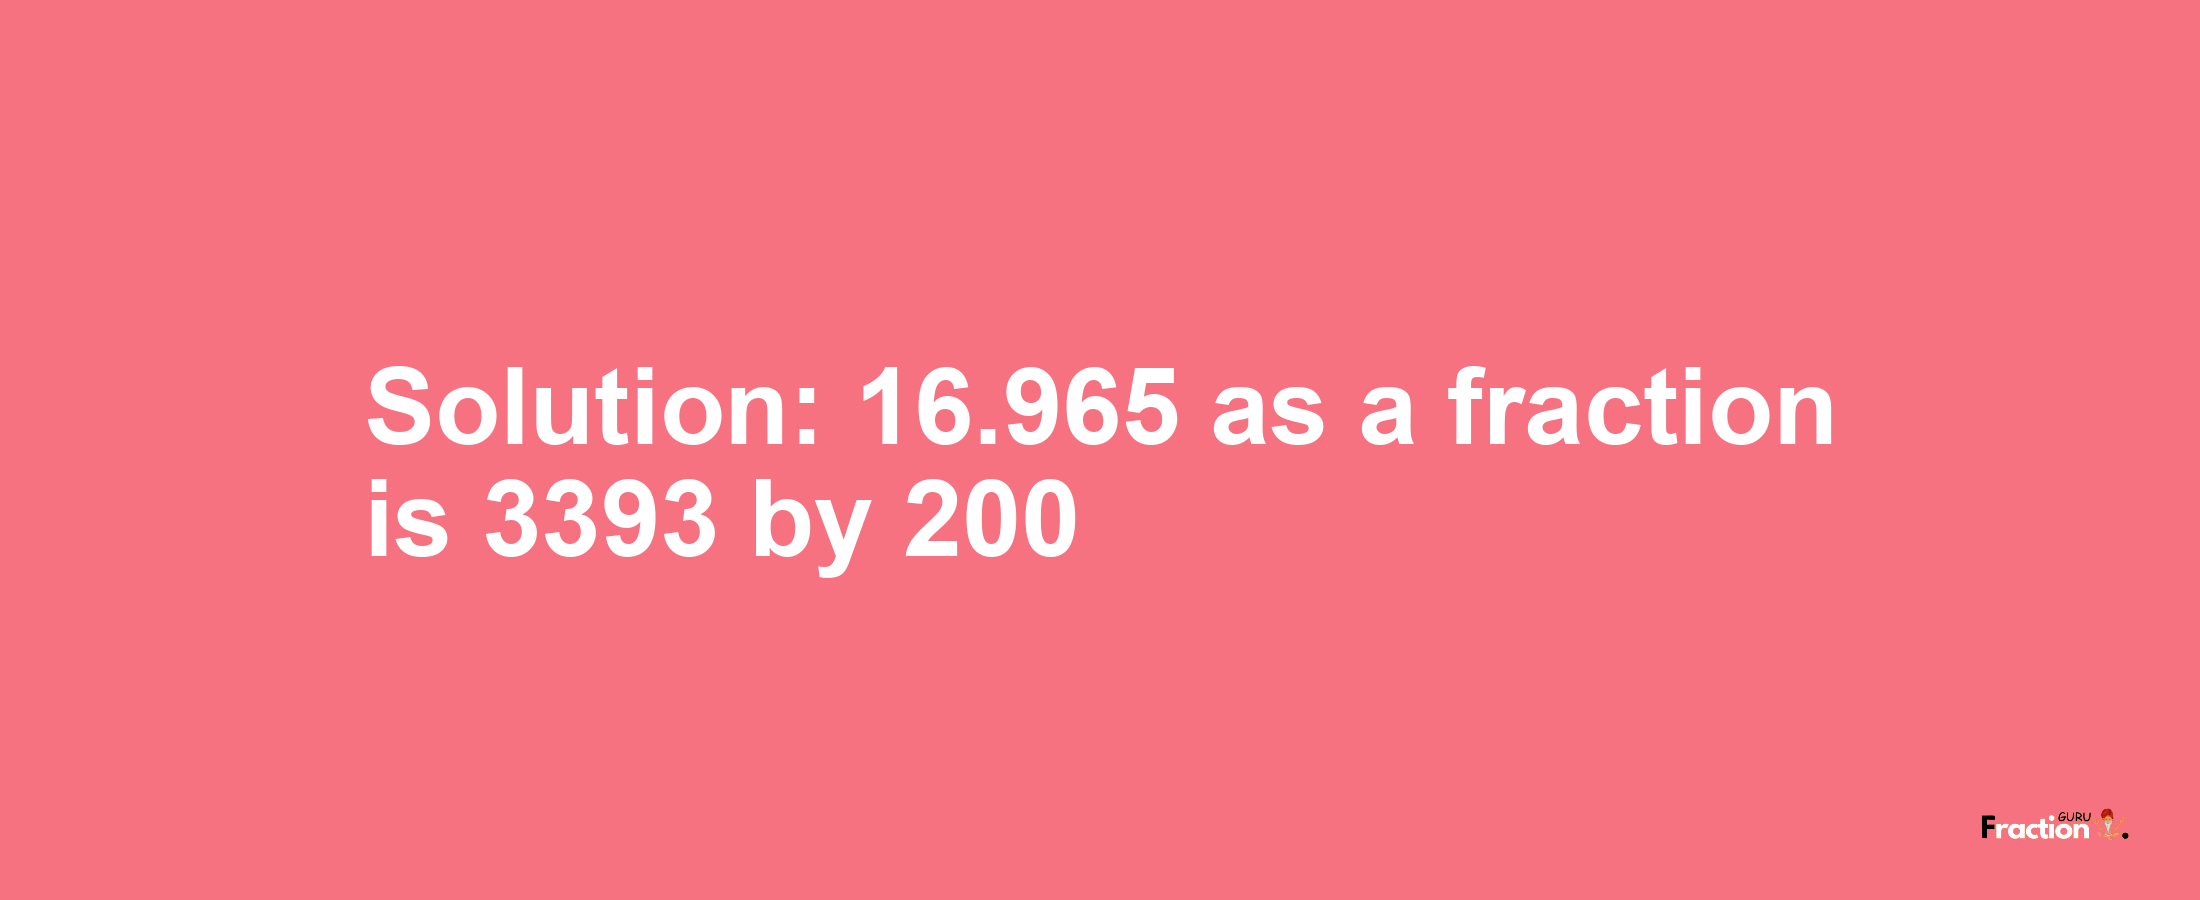 Solution:16.965 as a fraction is 3393/200